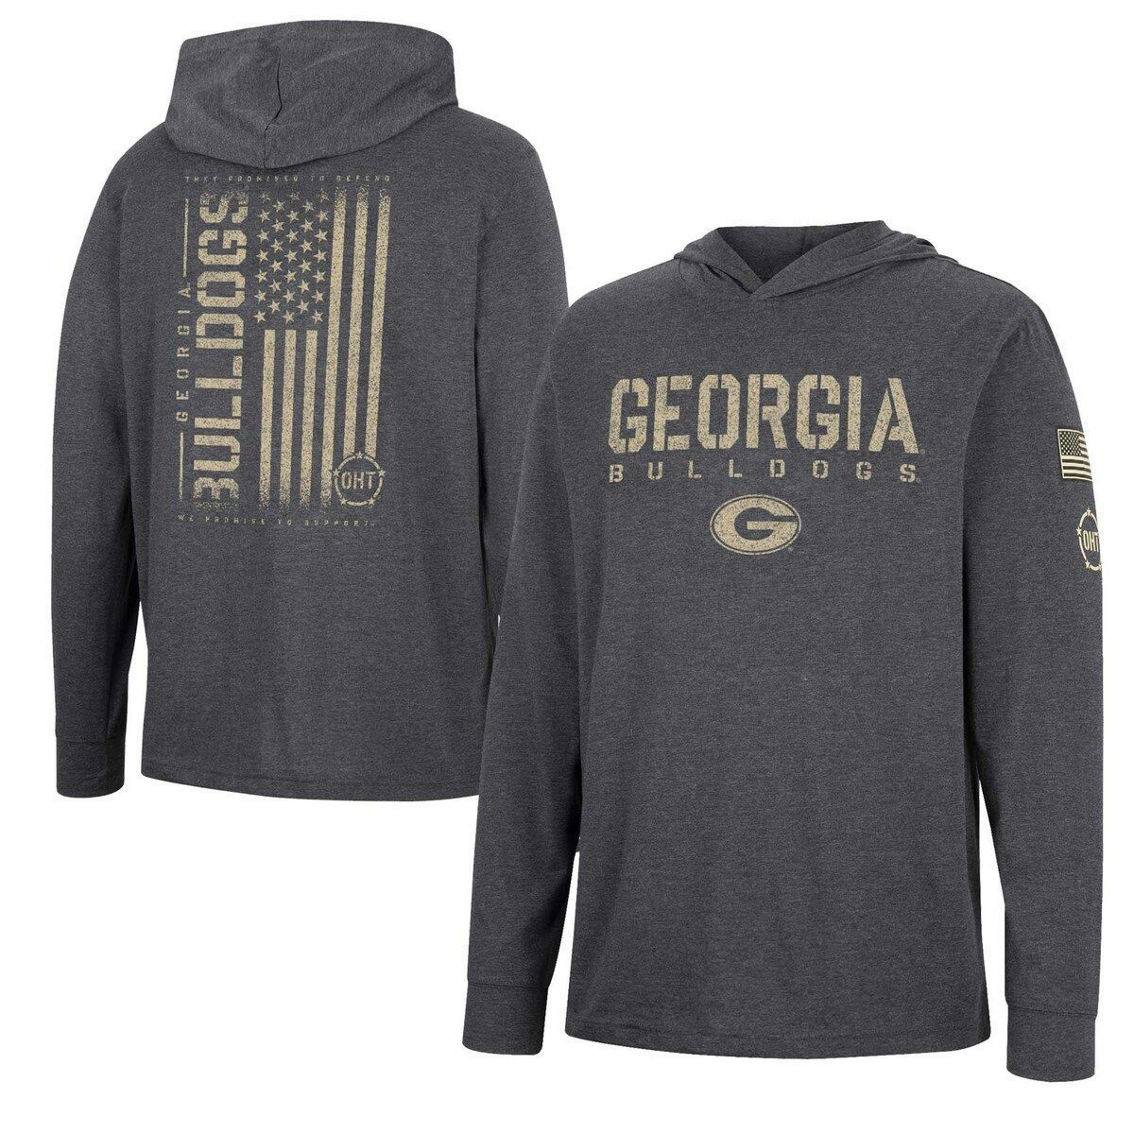 Men's Colosseum Charcoal Georgia Bulldogs Team OHT Military Appreciation Hoodie Long Sleeve T-Shirt - Image 2 of 4